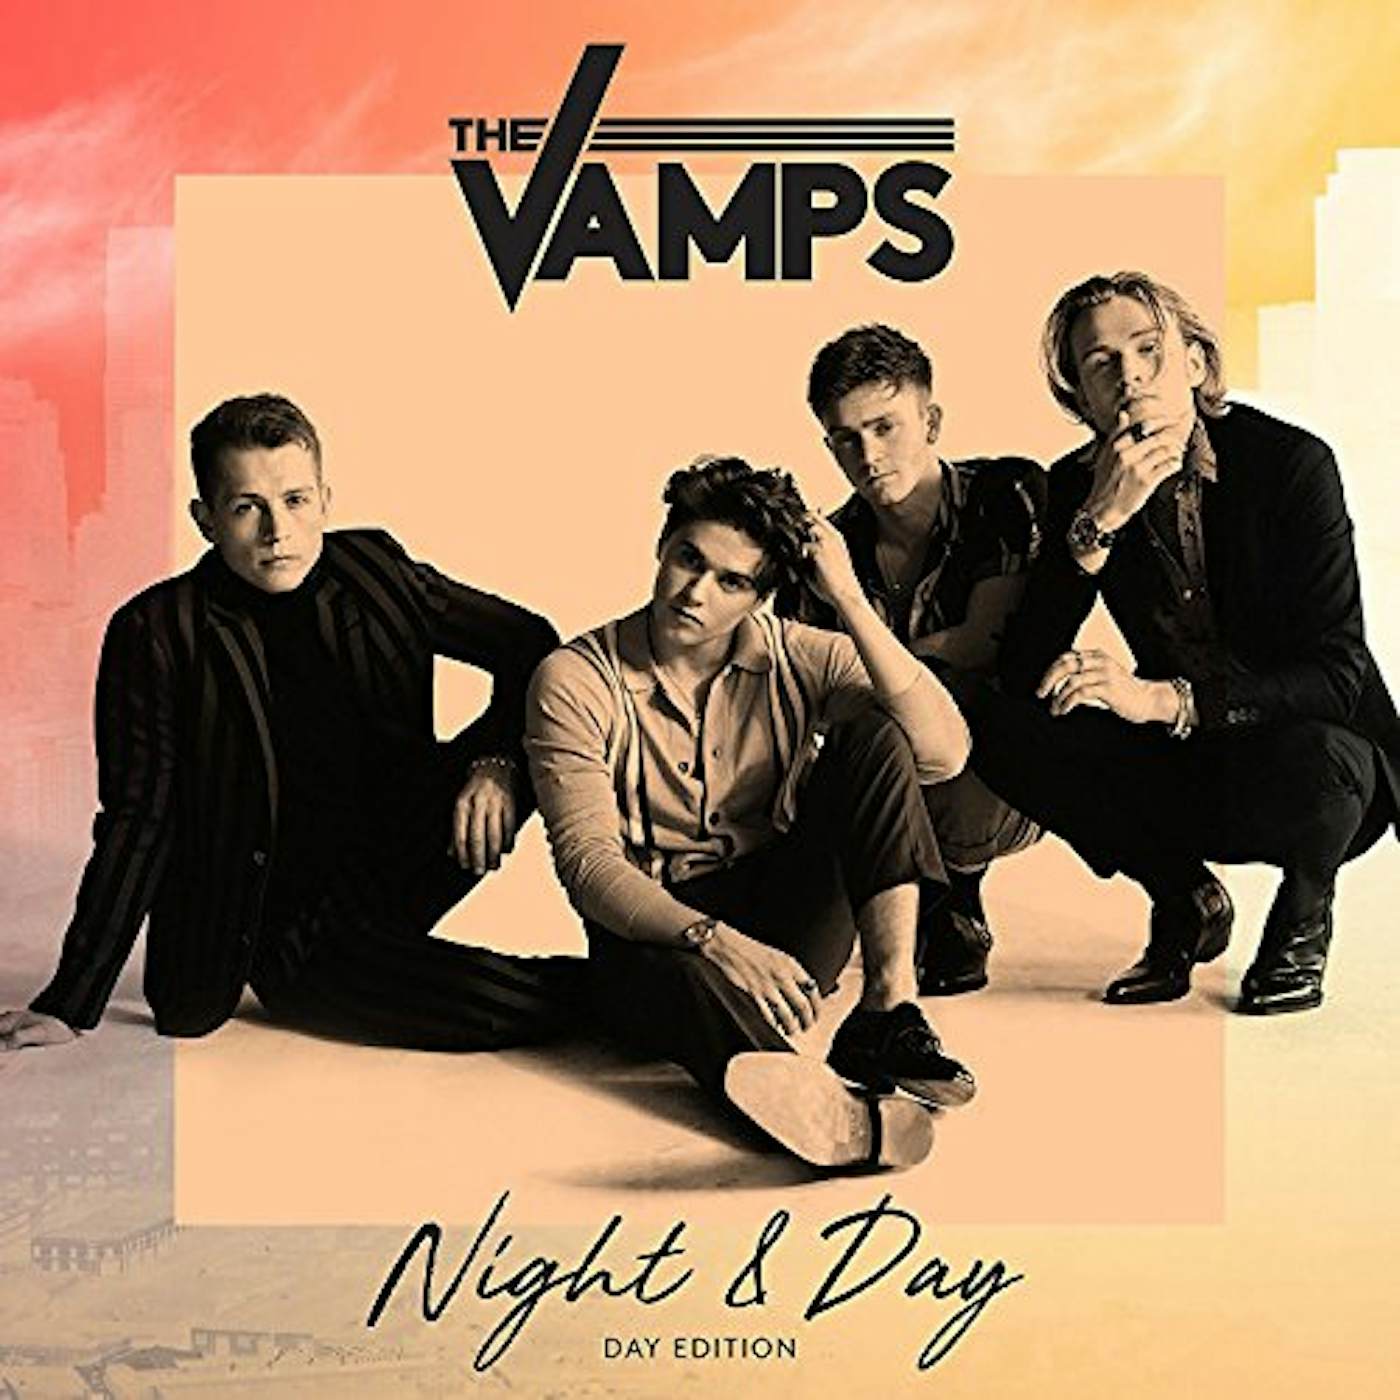 The Vamps NIGHT & DAY: DAY EDITION CD